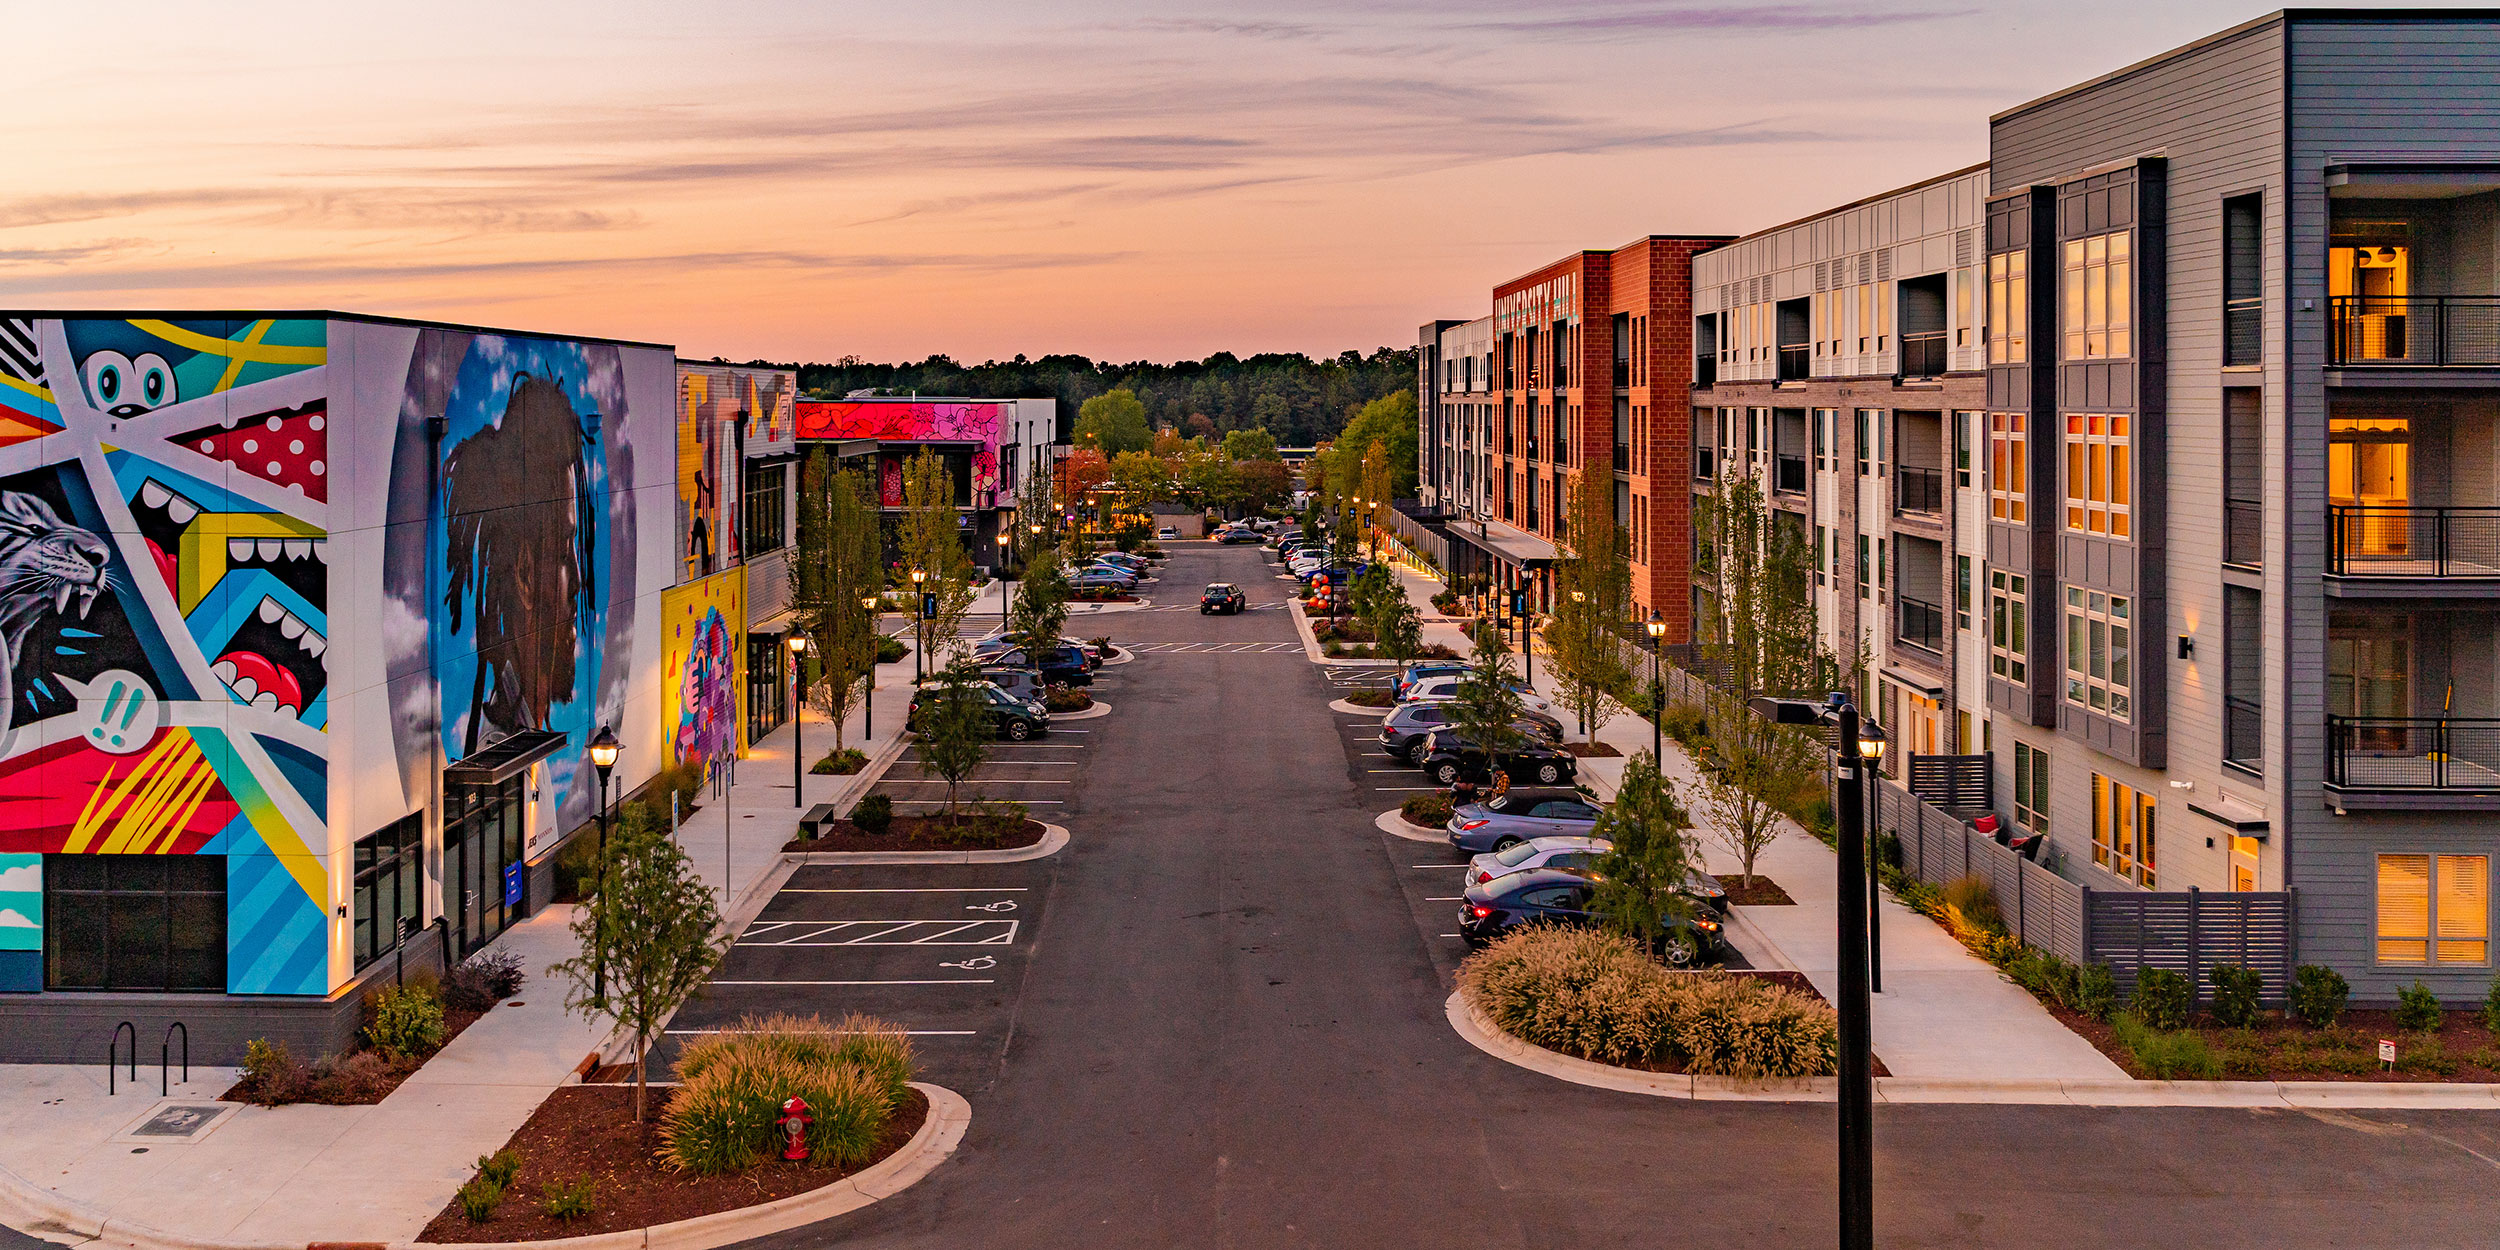 Modern apartment building across from large colorful wall murals during sunset in University Hill in Wake County